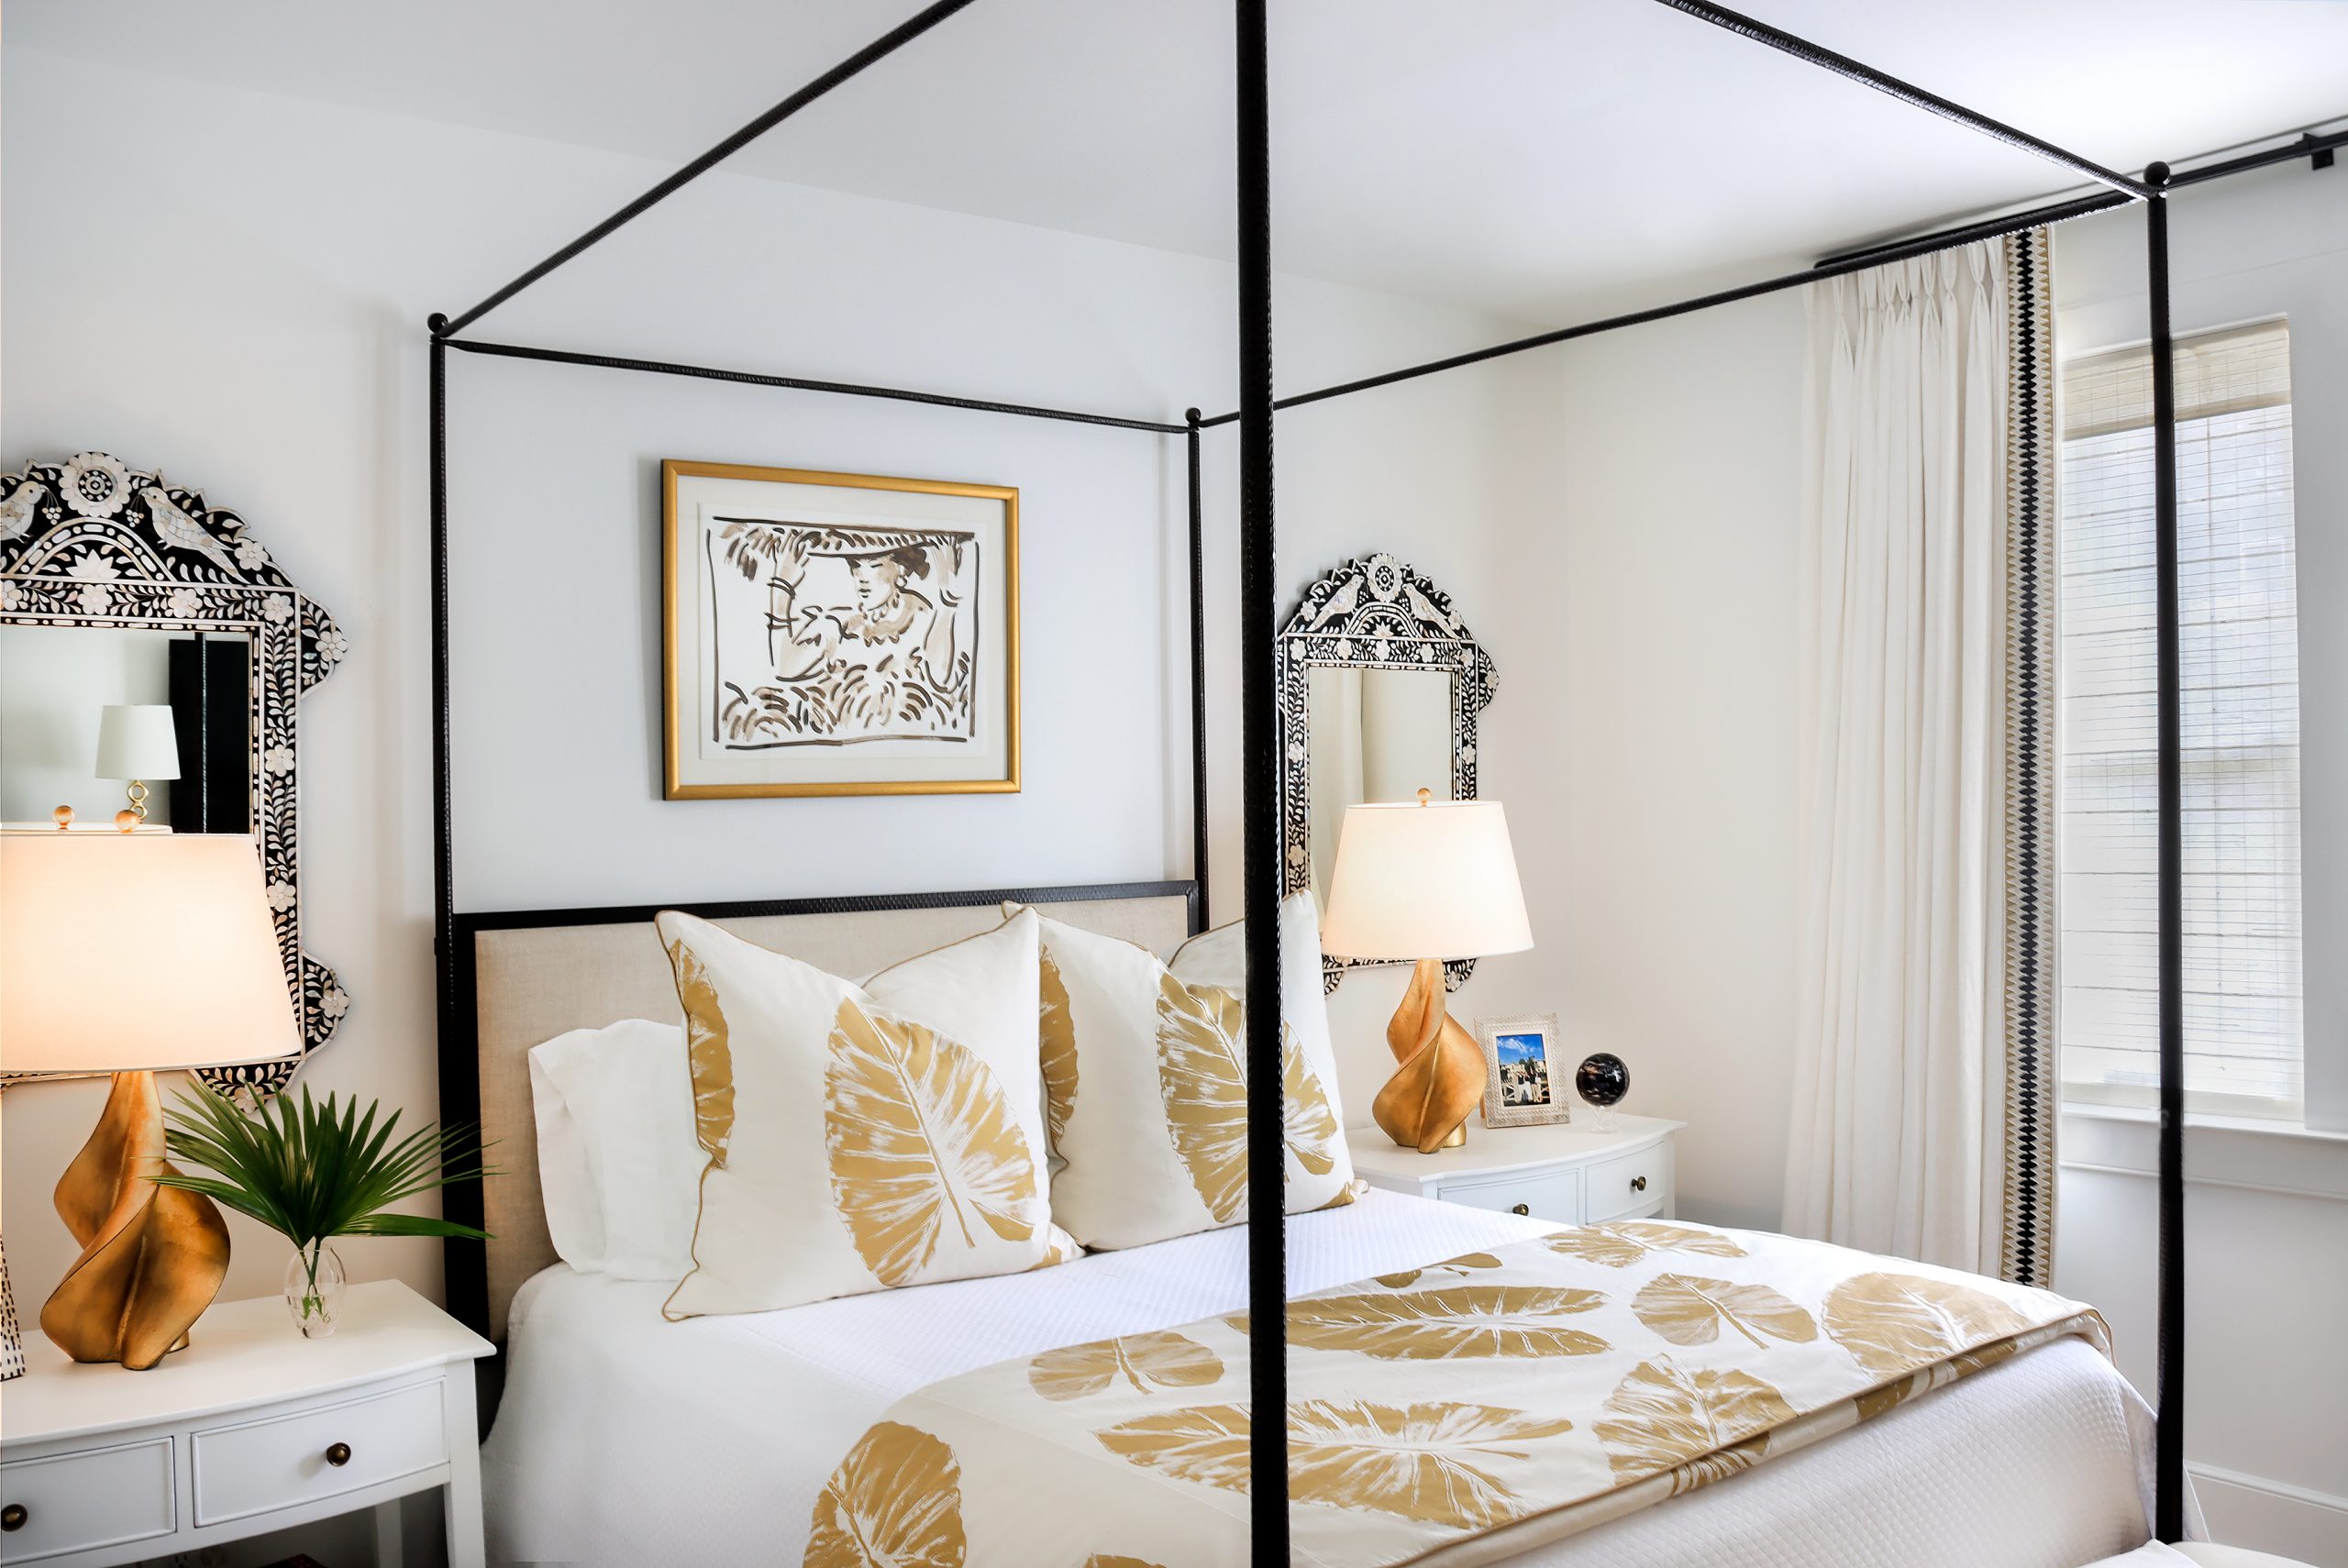 Mary Bond’s bedroom is peaceful and exotic, with a hammered wrought iron bed dressed with white coverlet accented by Rose Cumming banana leaf fabric. Mary Bond admits to an obsession for palms and animal prints — a signature throughout her eclectic home.
